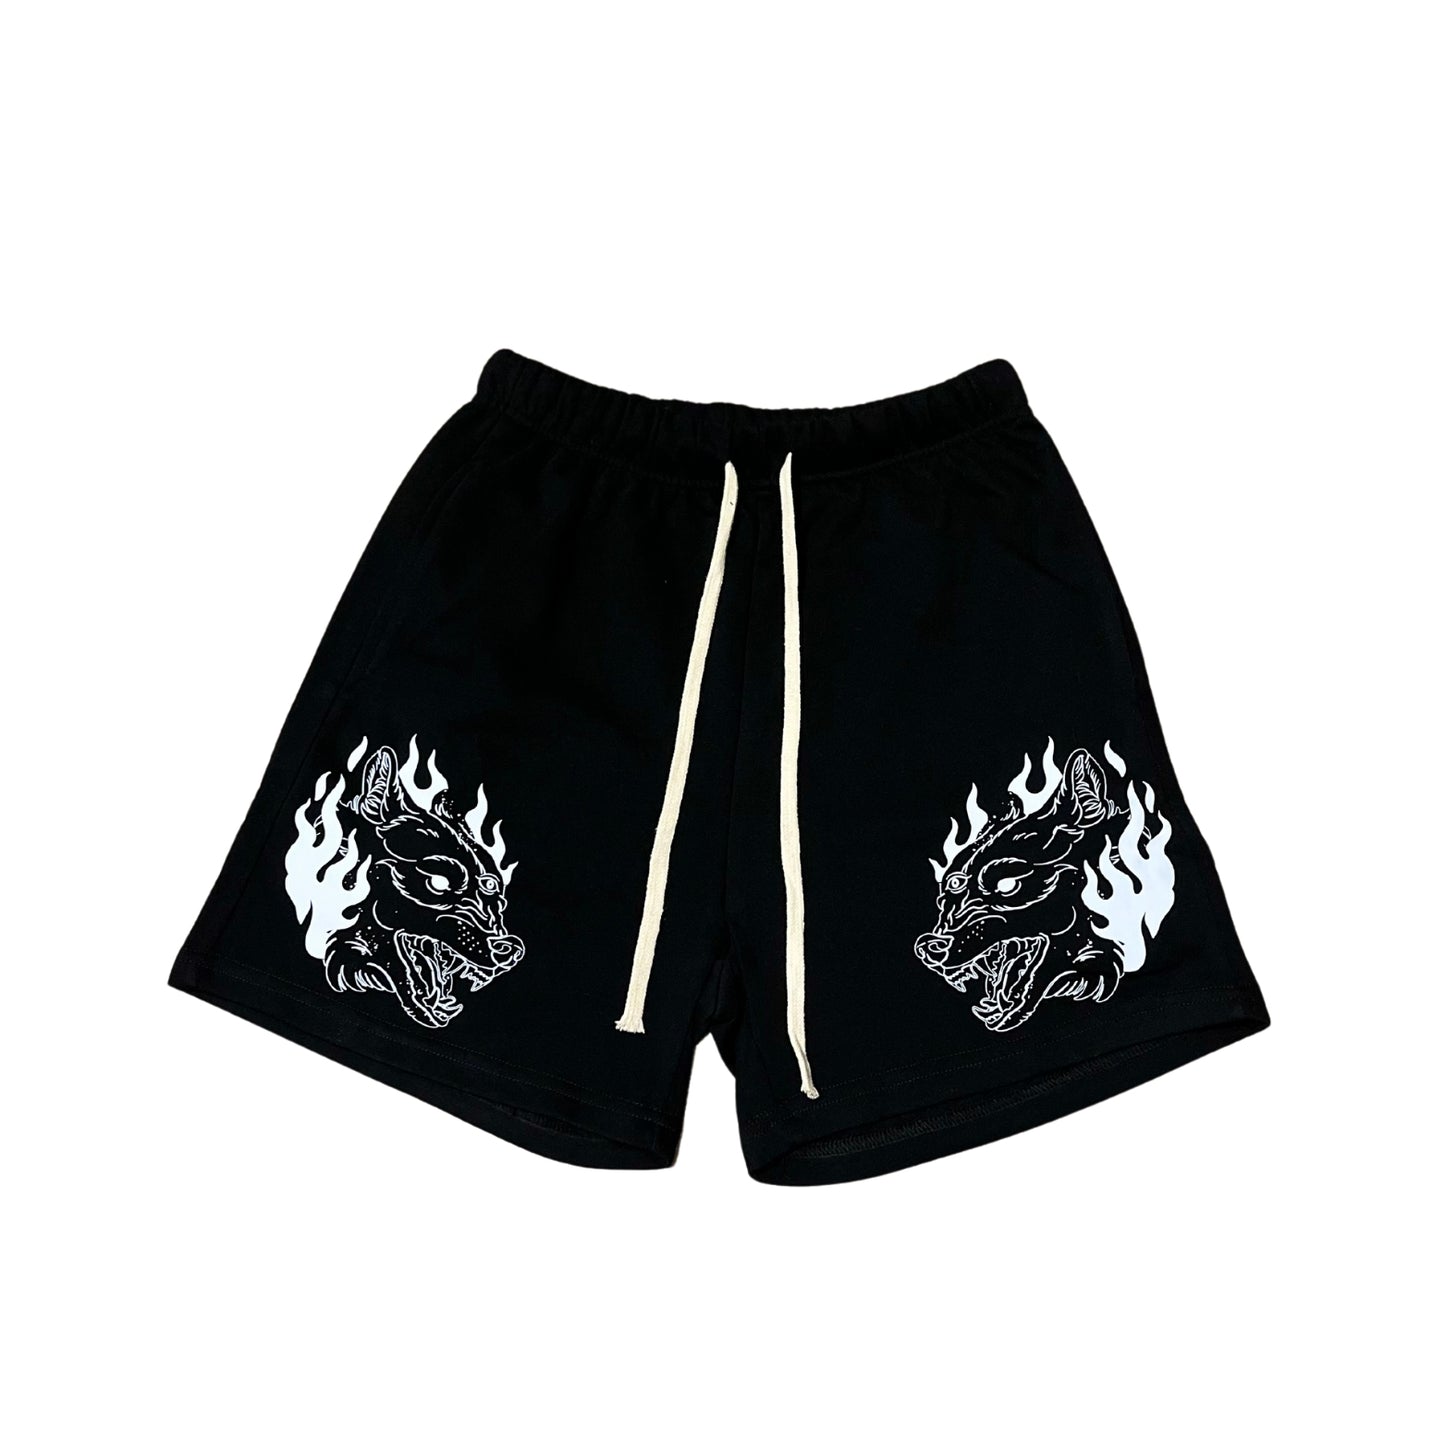 D.O.W. French Terry Shorts